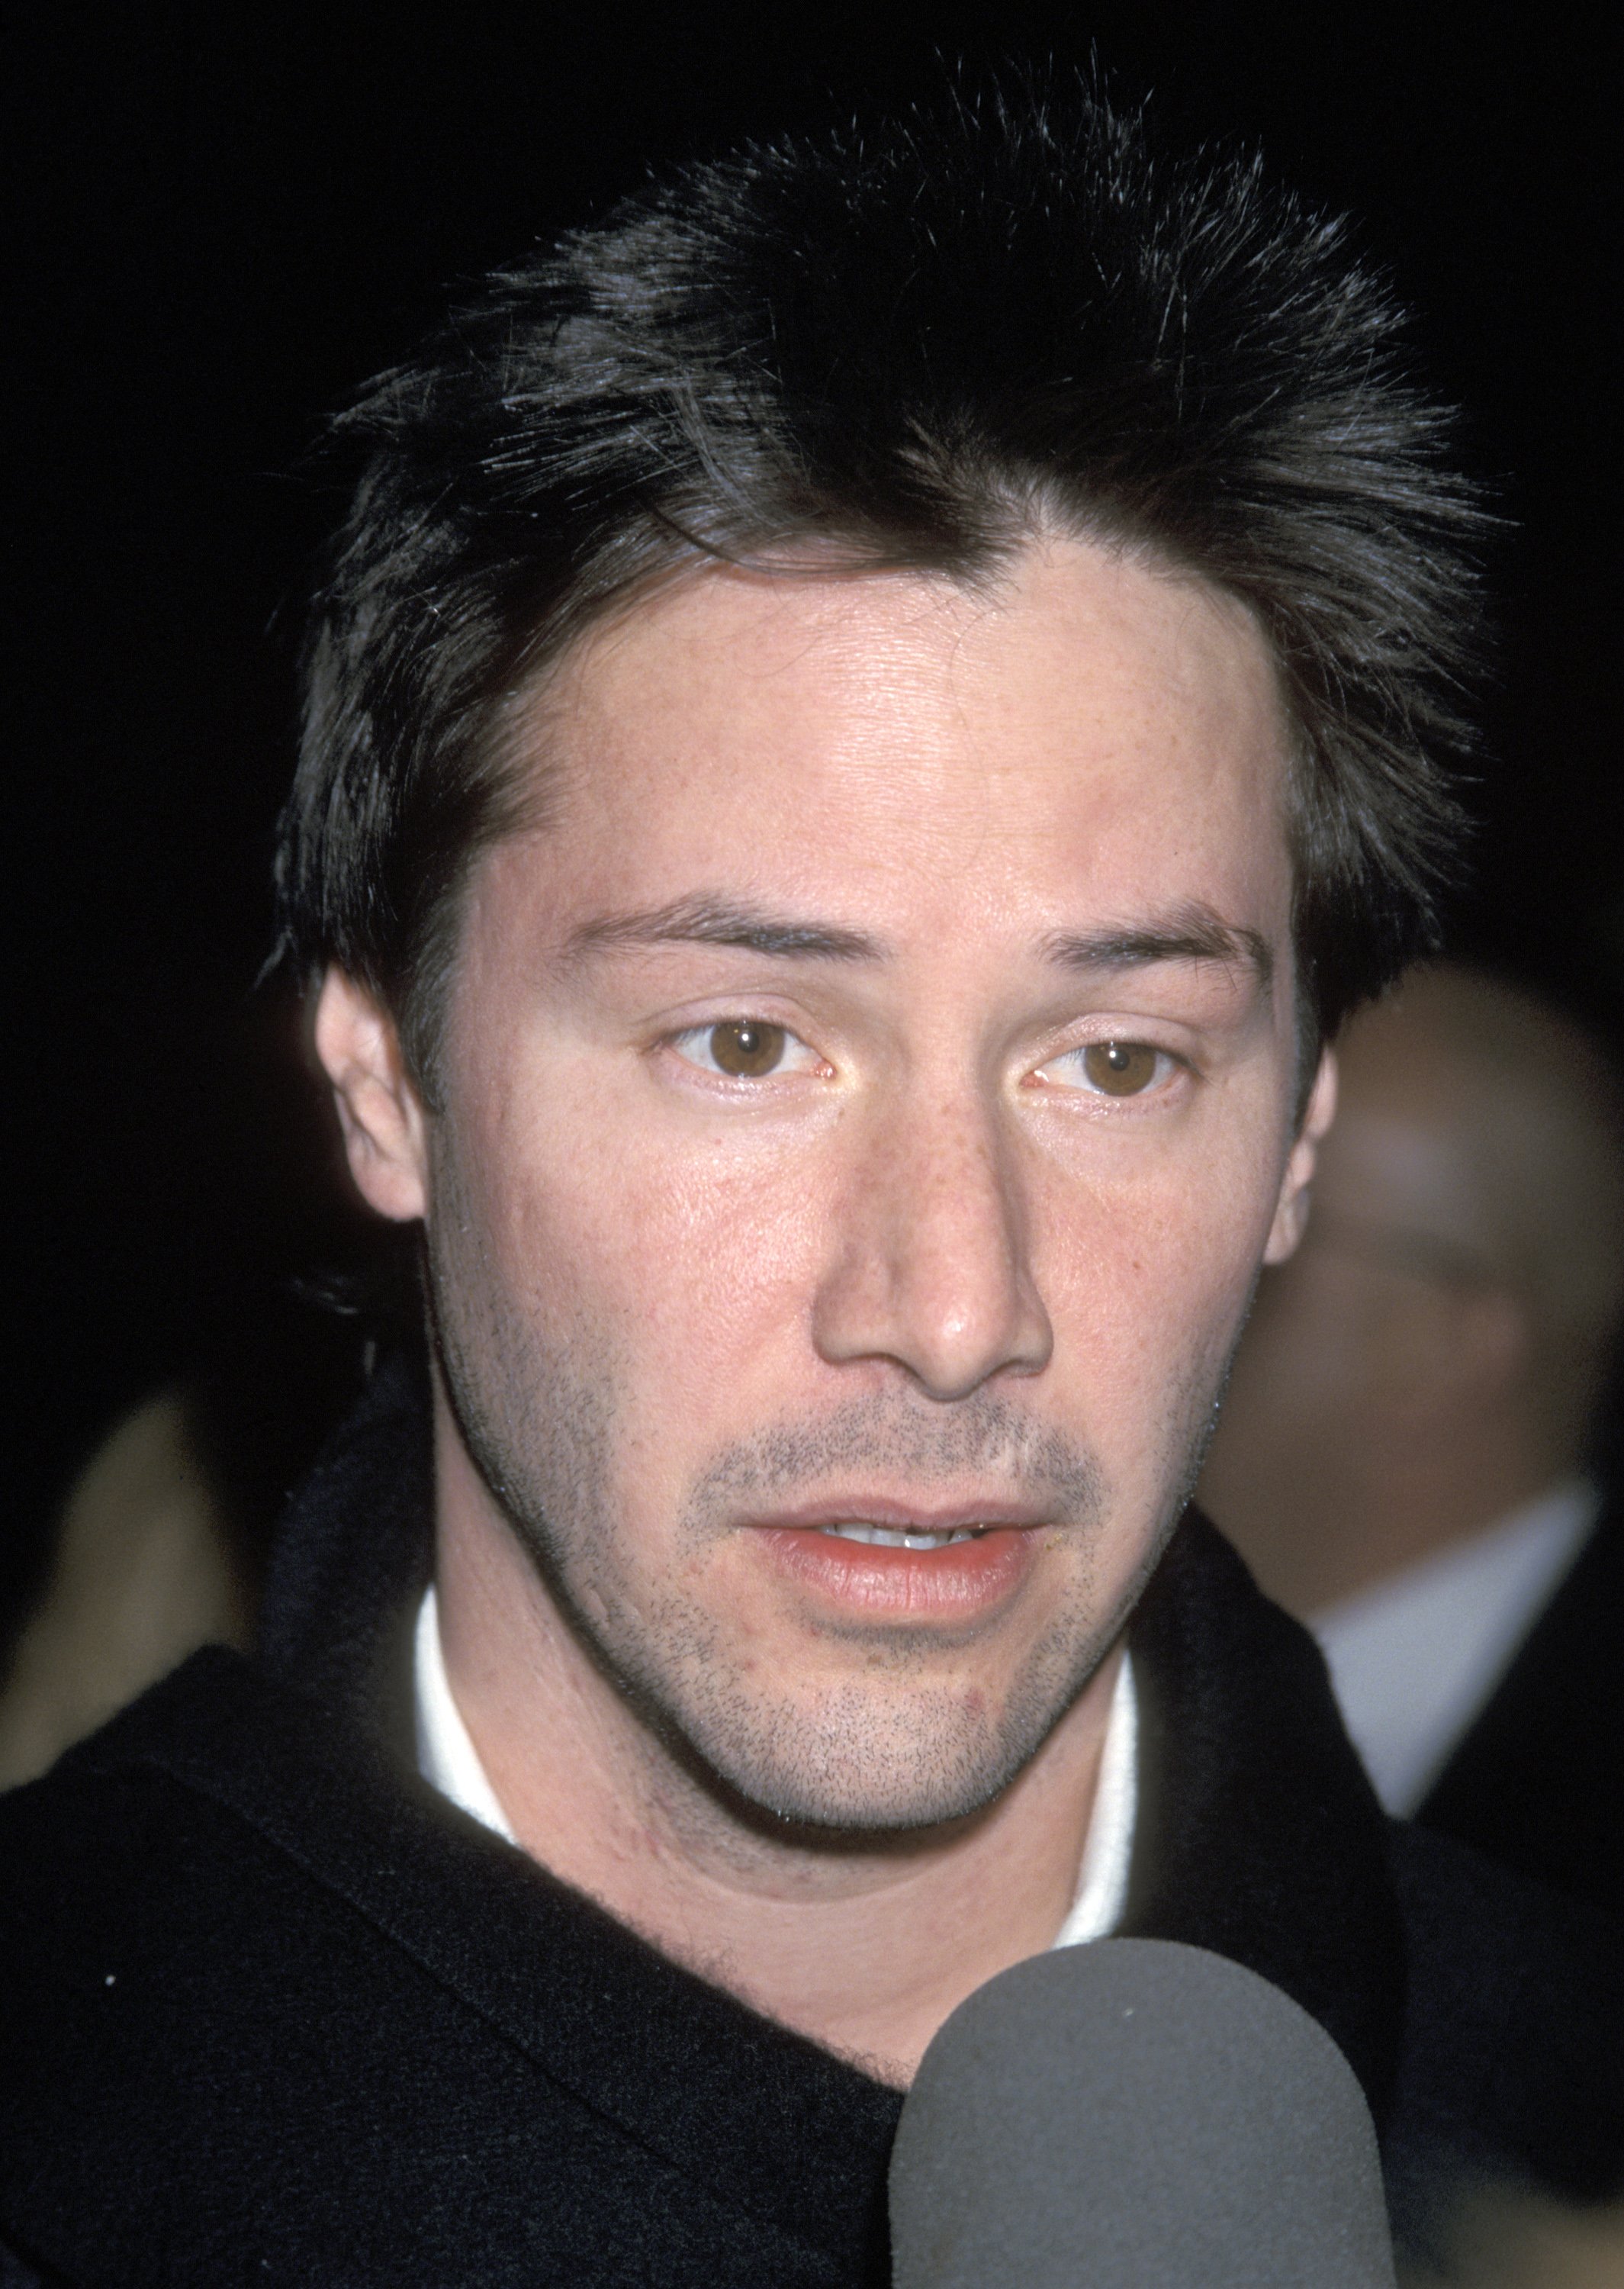 Keanu Reeves speaks to the press during "The Gift" Los Angeles premiere at Paramount Studios December 10, 2000, in Hollywood, California. | Source: Getty Images